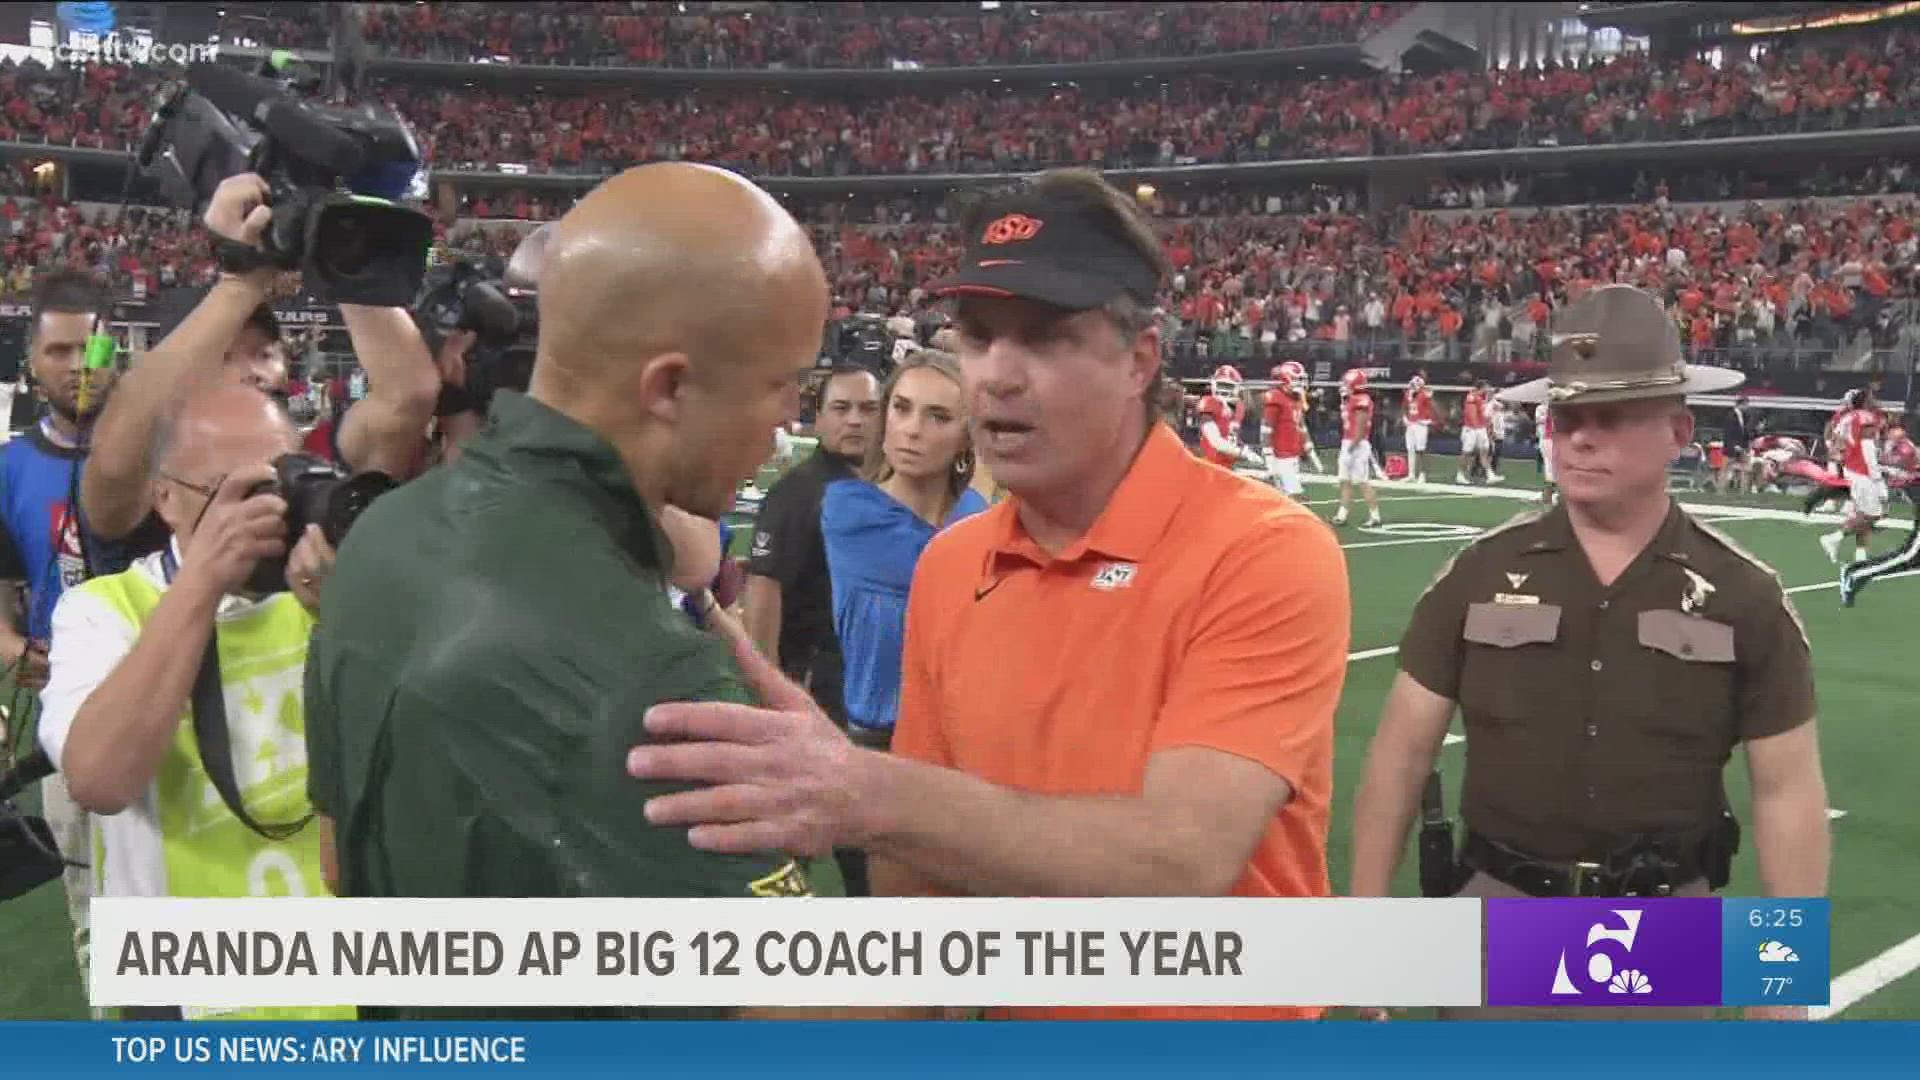 The University of Baylor is on a roll. After winning their game against OSU last weekend, their new head coach receives a huge honor.